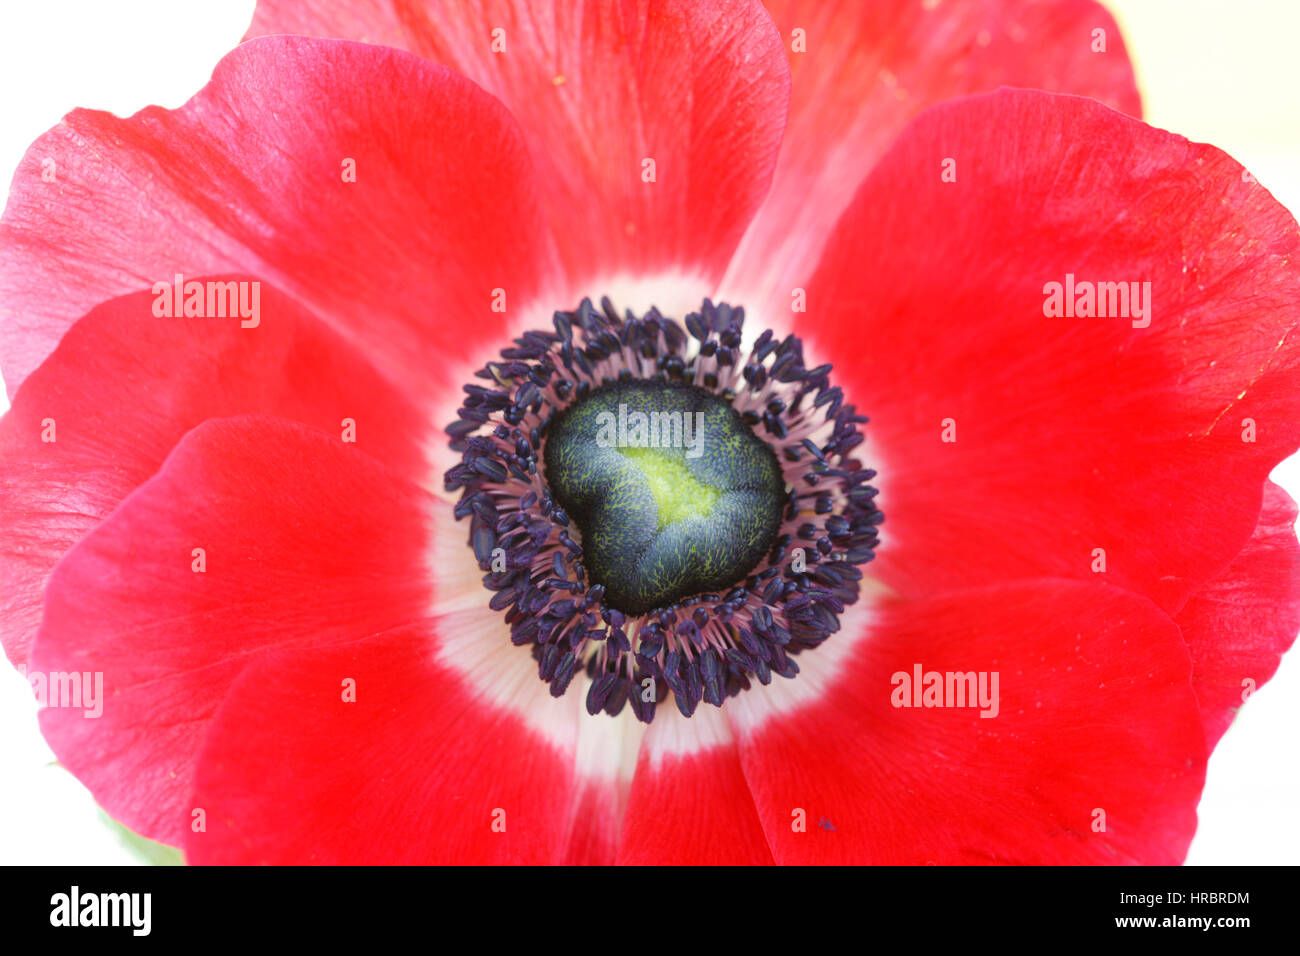 still life close up single red anemone flower head on white - fresh and contemporary  Jane Ann Butler Photography JABP1837 Stock Photo